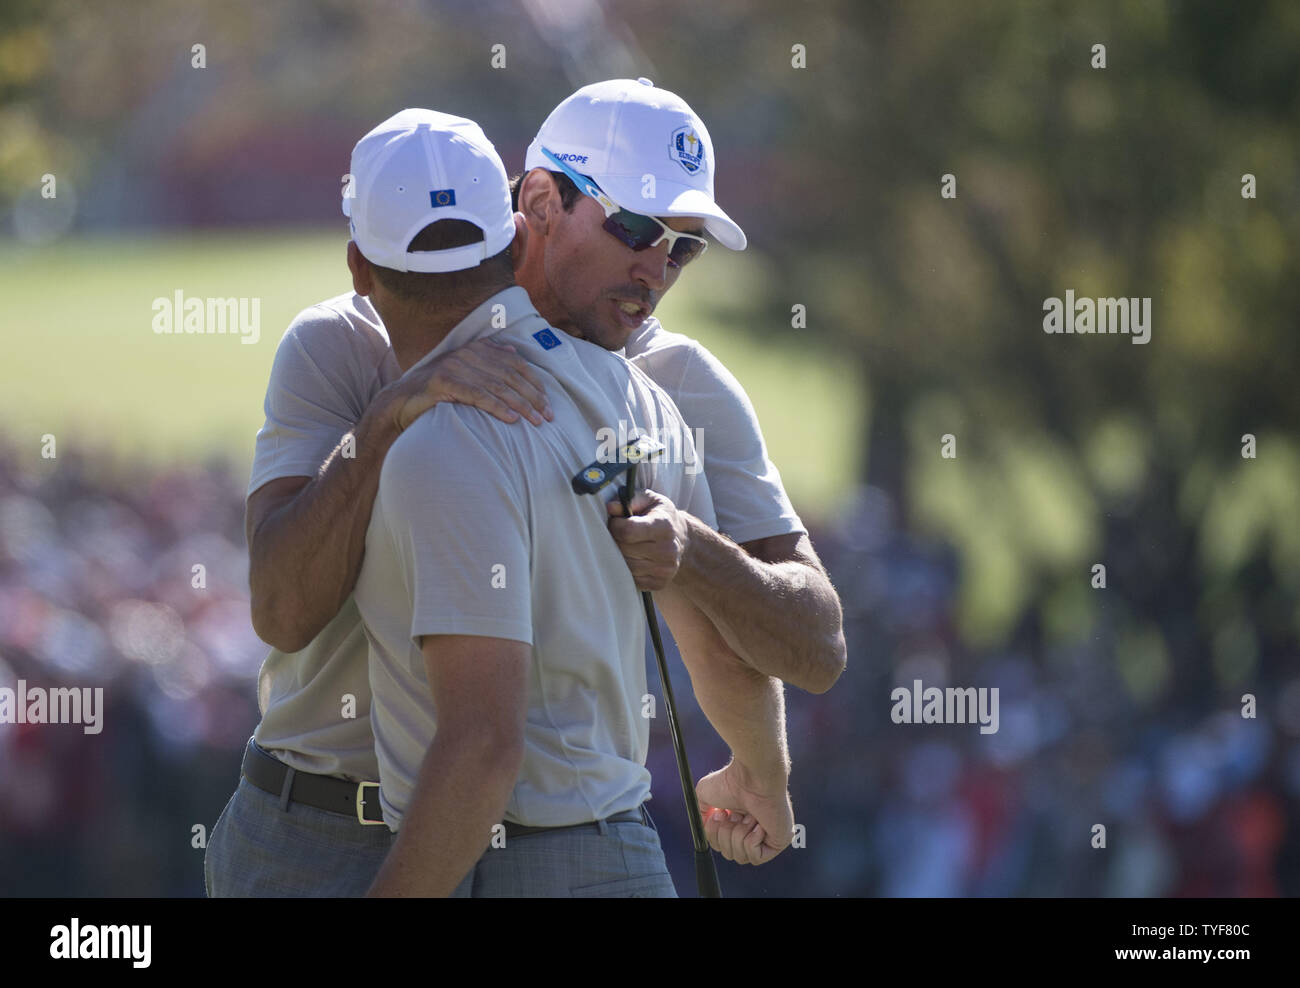 European team member Rafa Cabrera Bello (R) hugs Sergio Garcia after Garcia made a putt on the 16th green on day 2 of the 2016 Ryder Cup at Hazeltine National Golf Club in Chaska, Minnesota on October 1, 2016. Photo by Kevin Dietsch/UPI Stock Photo